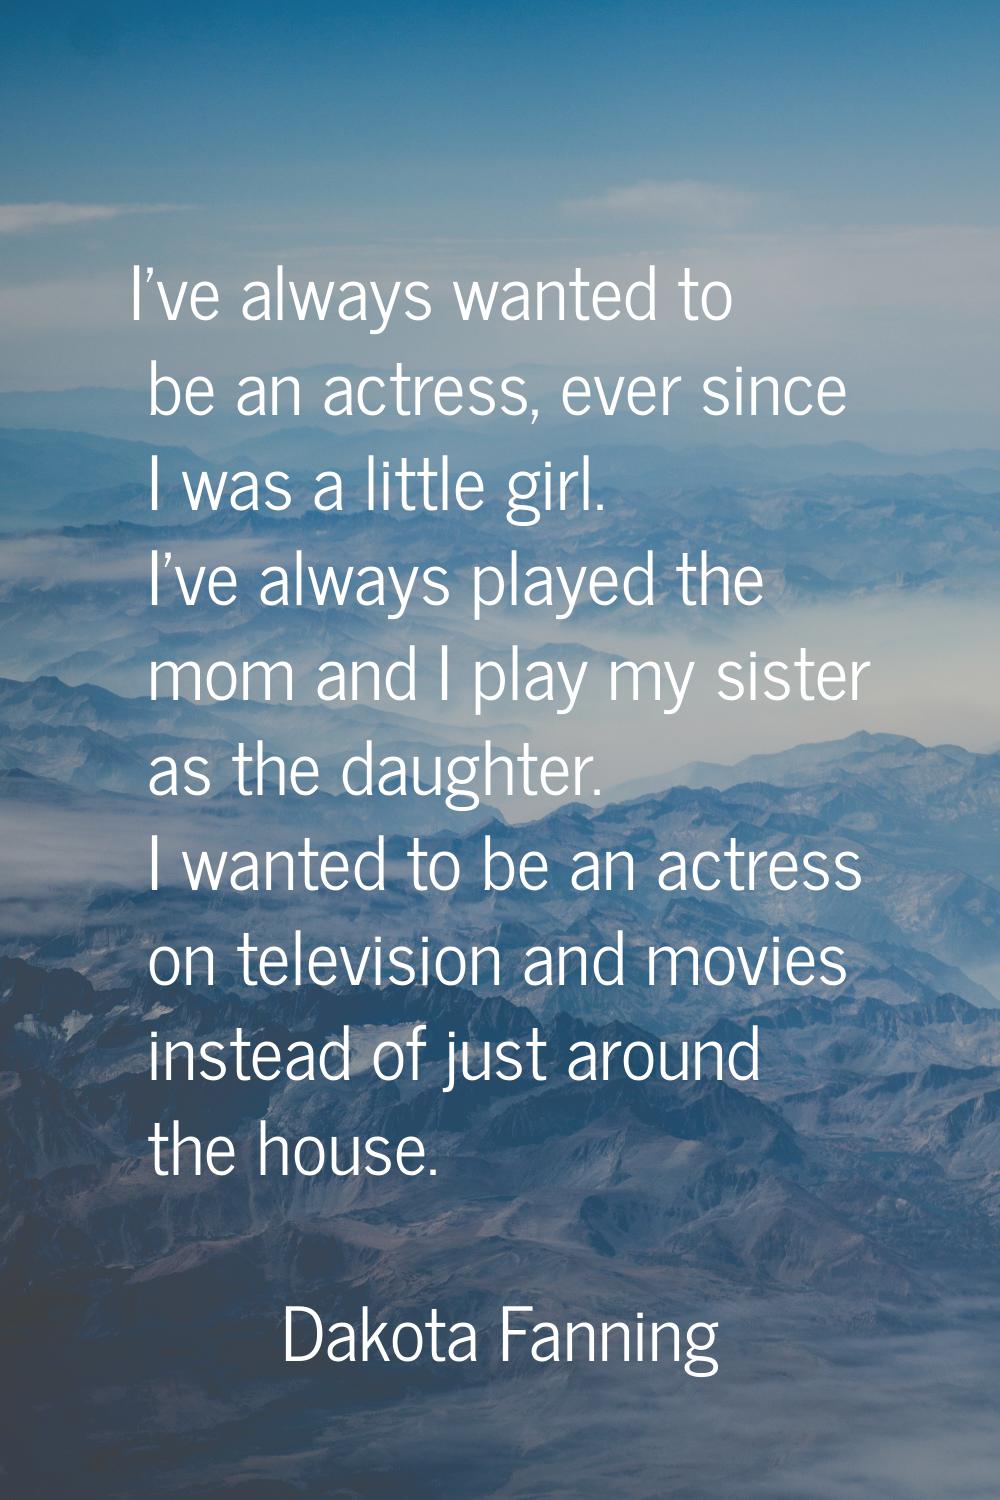 I've always wanted to be an actress, ever since I was a little girl. I've always played the mom and